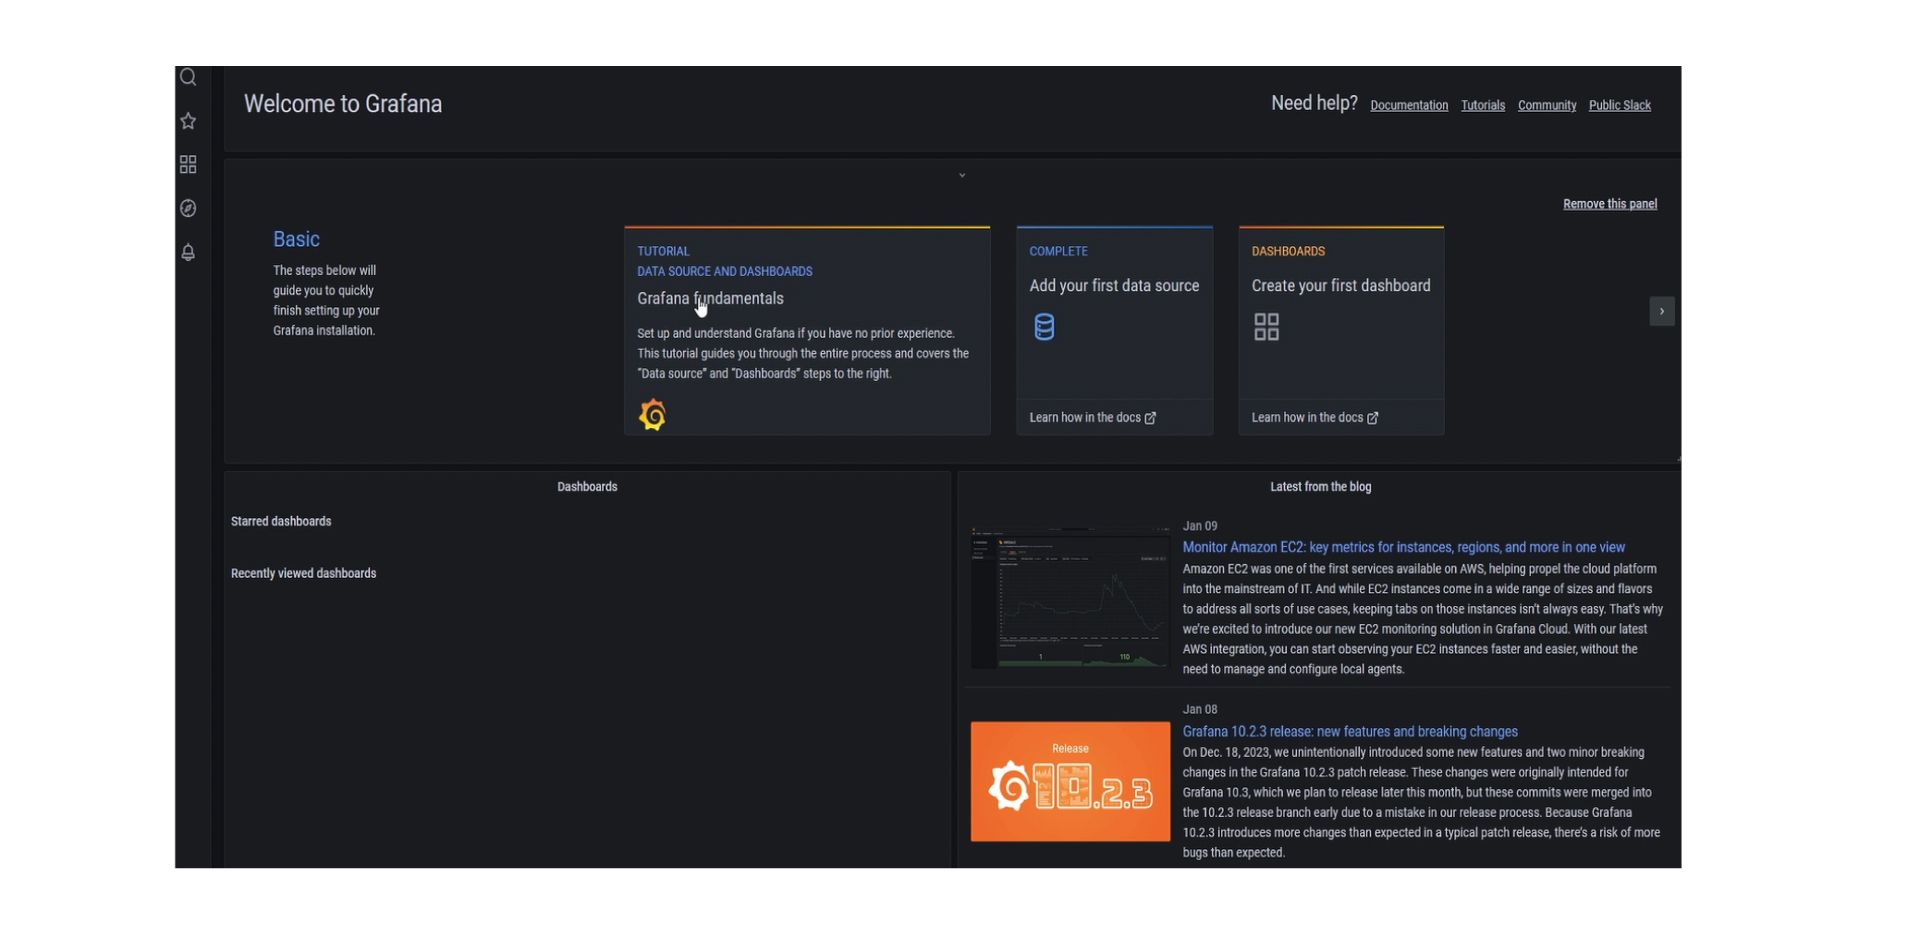 The image is a screenshot of the Grafana dashboard home page. It features a welcoming message and a black sidebar on the left with options like "Starred dashboards" and "Recently viewed dashboards". In the main content area, there are sections titled "Basic", with steps to set up Grafana, a "Tutorial" on Grafana fundamentals, and boxes for "Add your first data source" and "Create your first dashboard" with corresponding links to learn more in the documentation. The top bar offers help resources such as "Documentation", "Tutorials", "Community", and "Public Slack". The design is dark-themed with highlighted areas in bright colors to attract attention to key actions for new users.